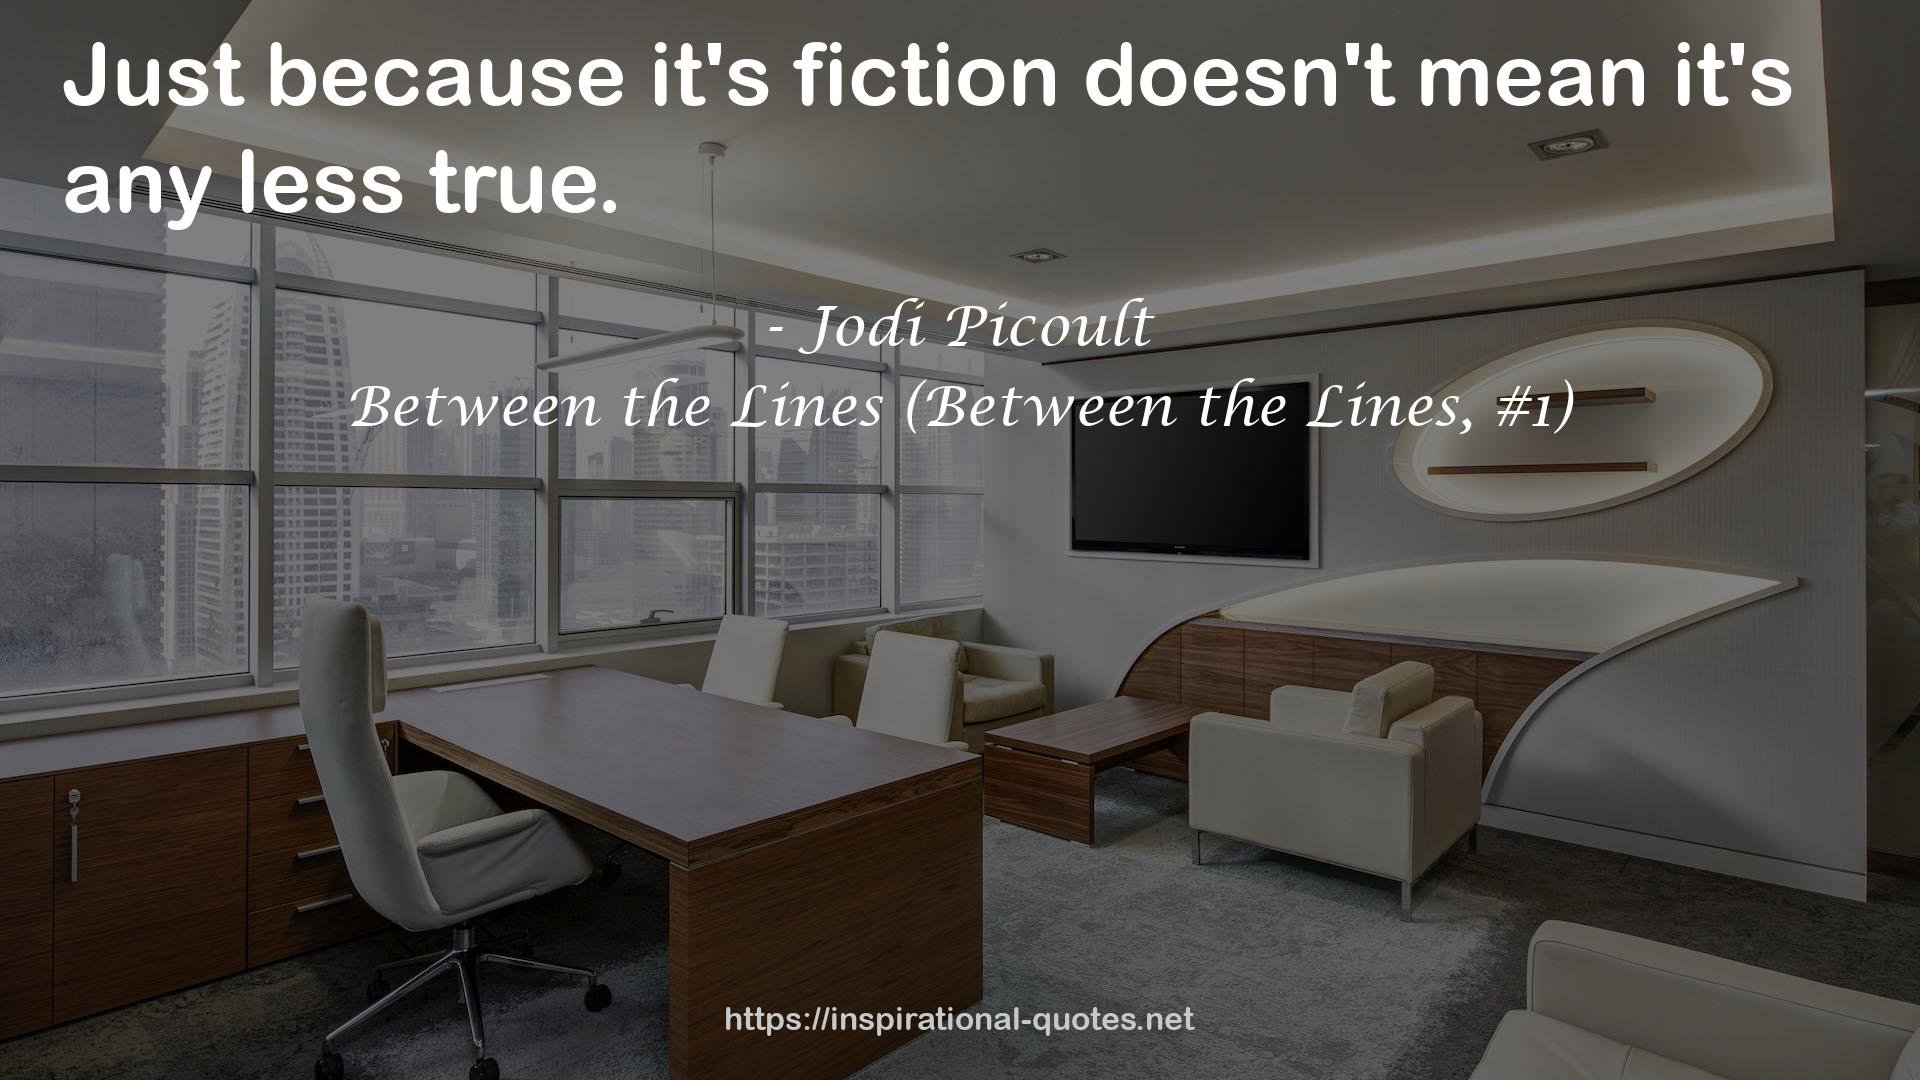 Between the Lines (Between the Lines, #1) QUOTES